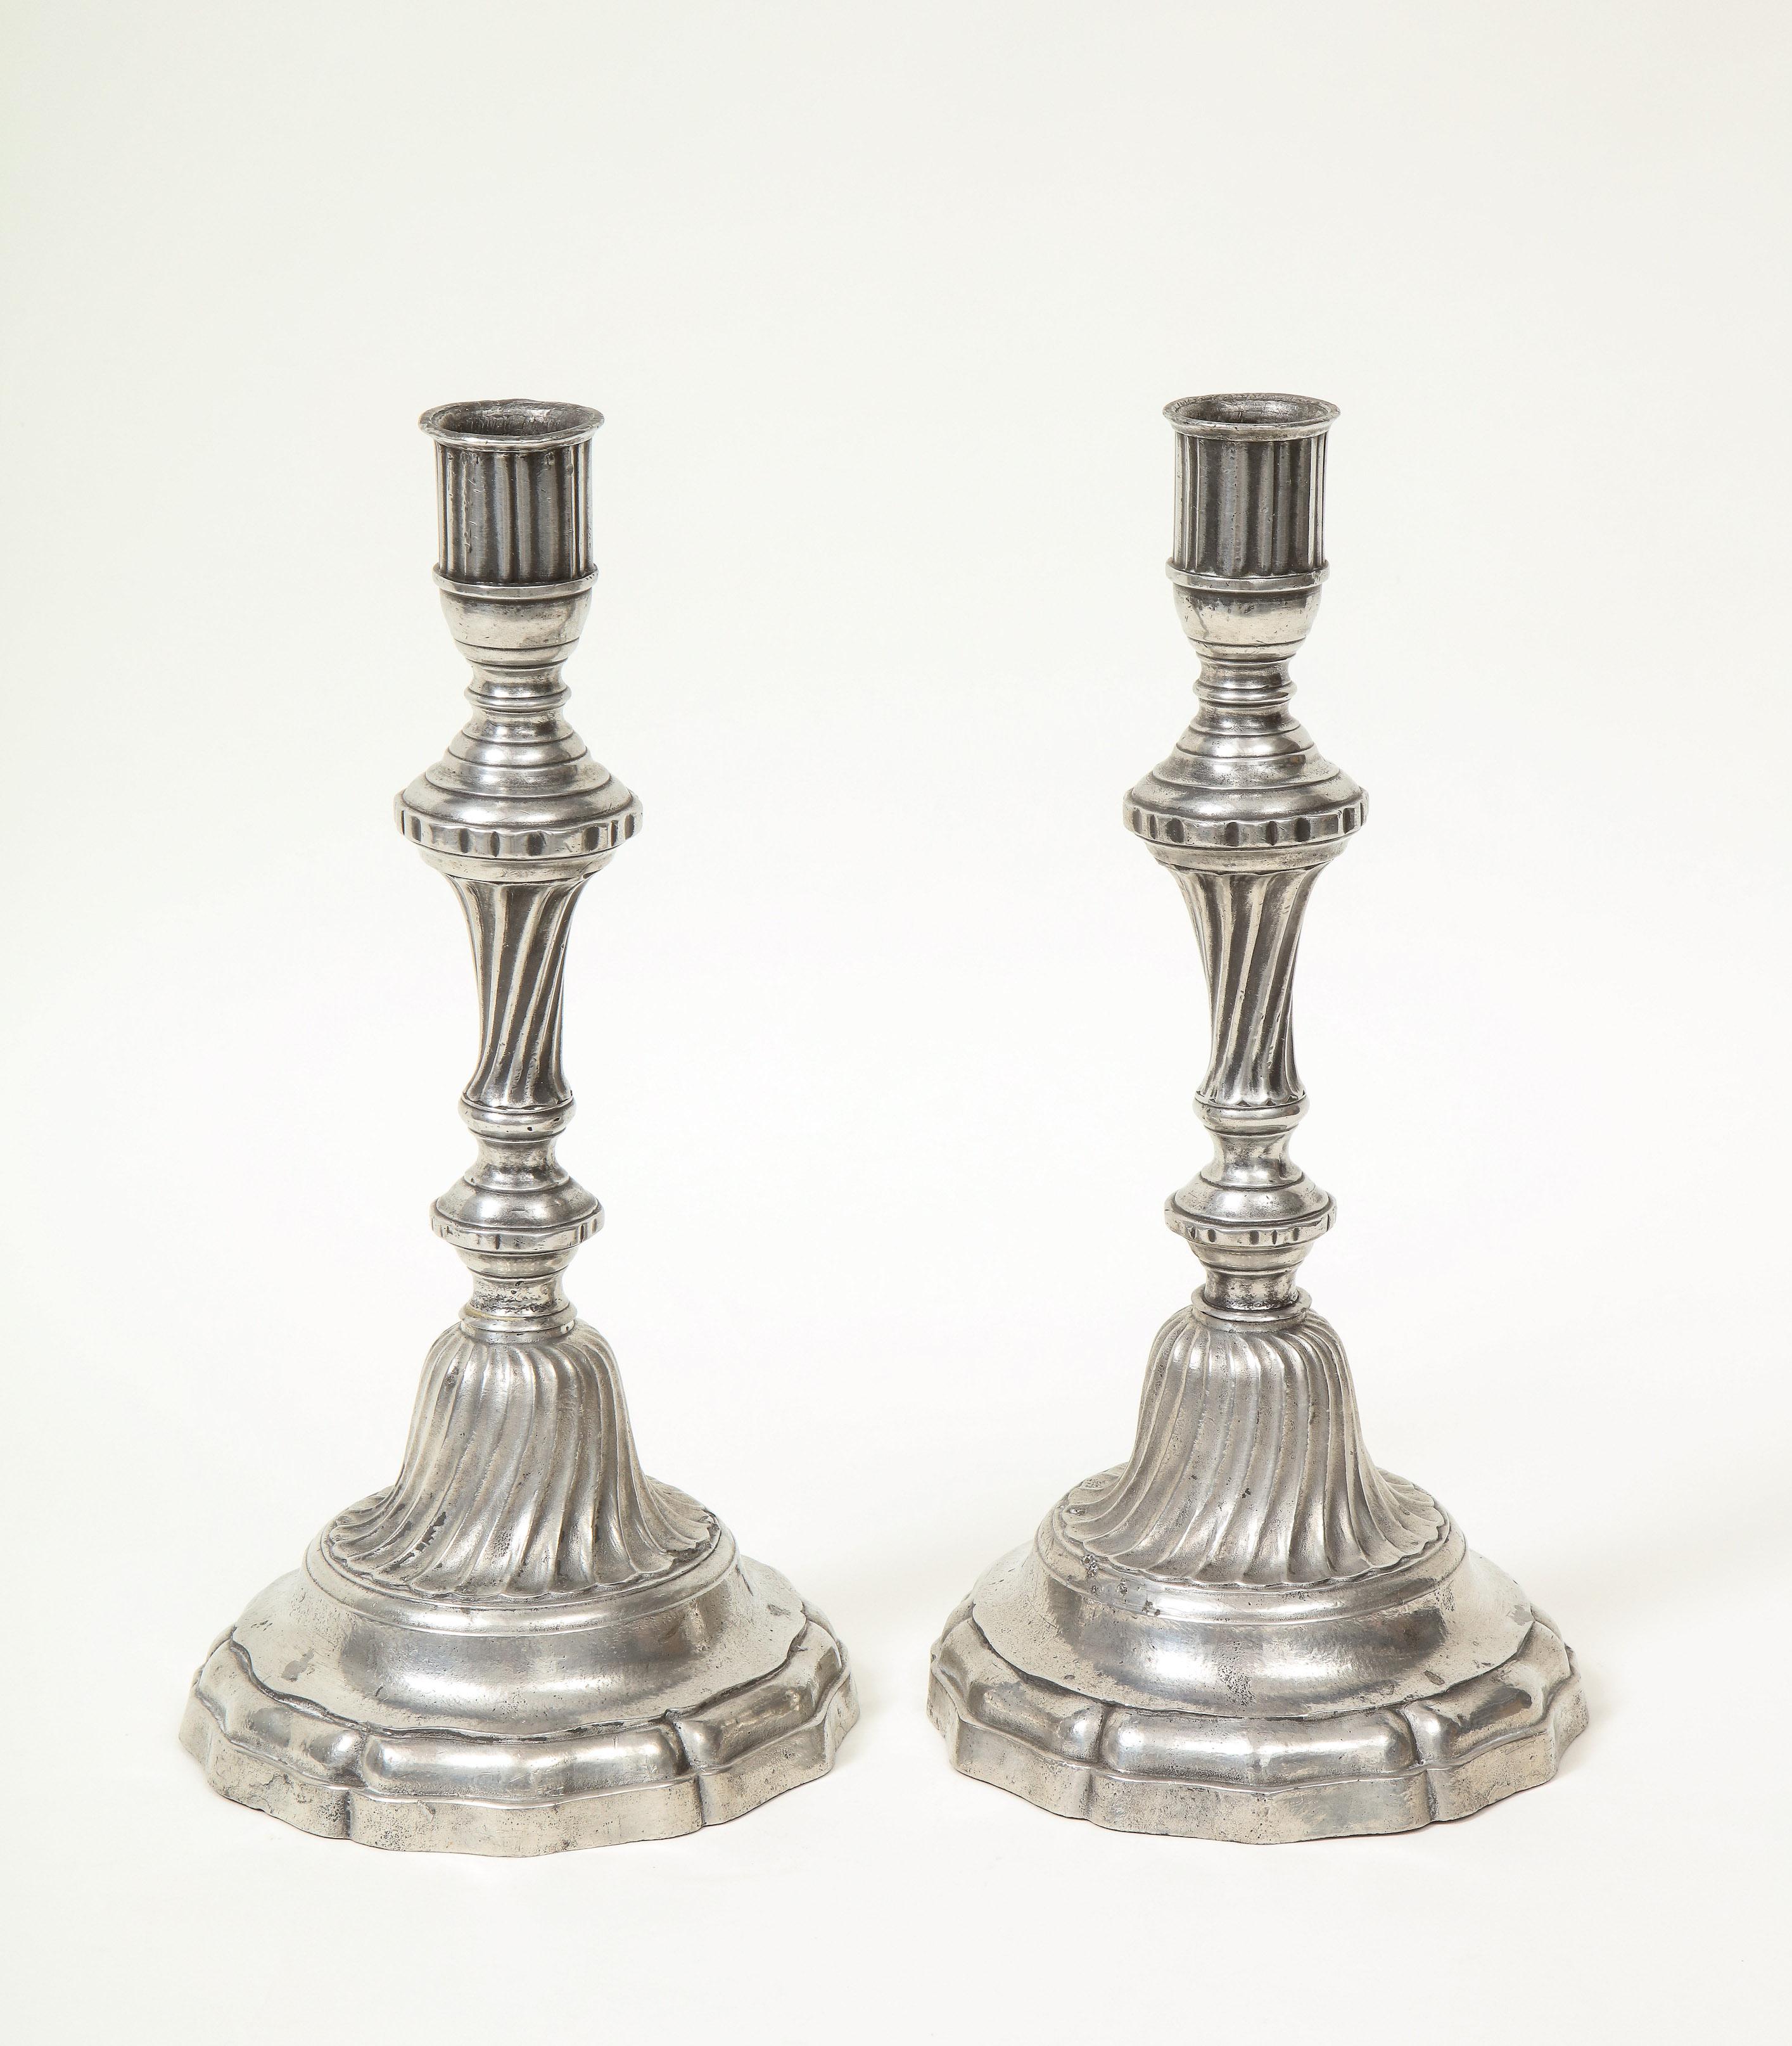 Exemplifies the Classical Baroque period with its spiral fluting detail and contrasting patina.